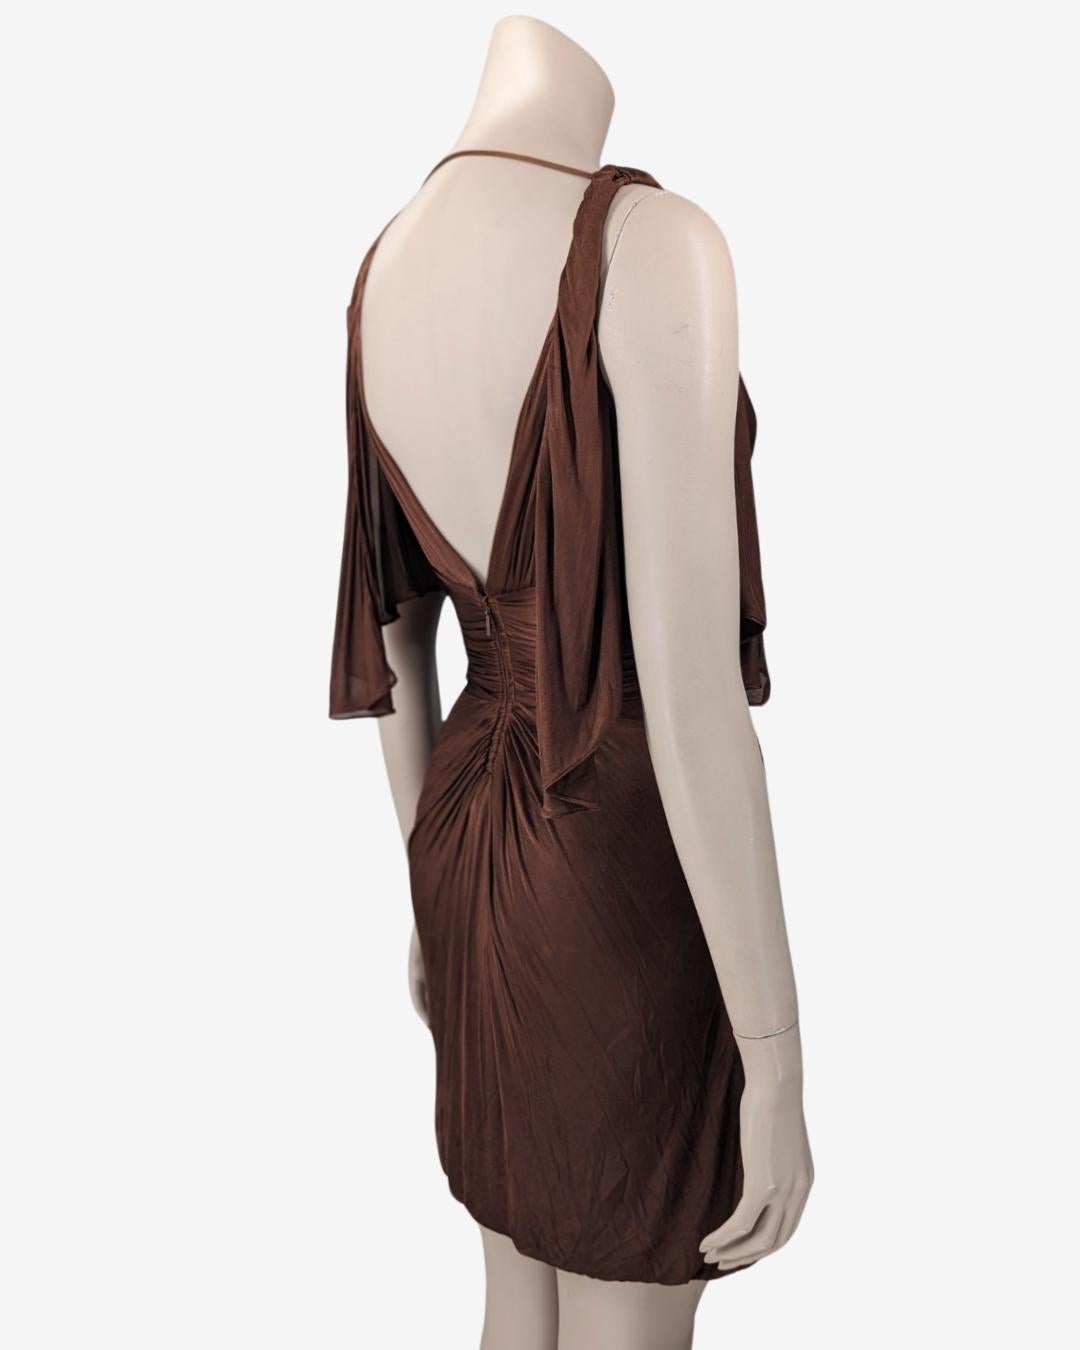 Gucci by Tom Ford Draped Brown Mini Dress S/S 2003 For Sale 1